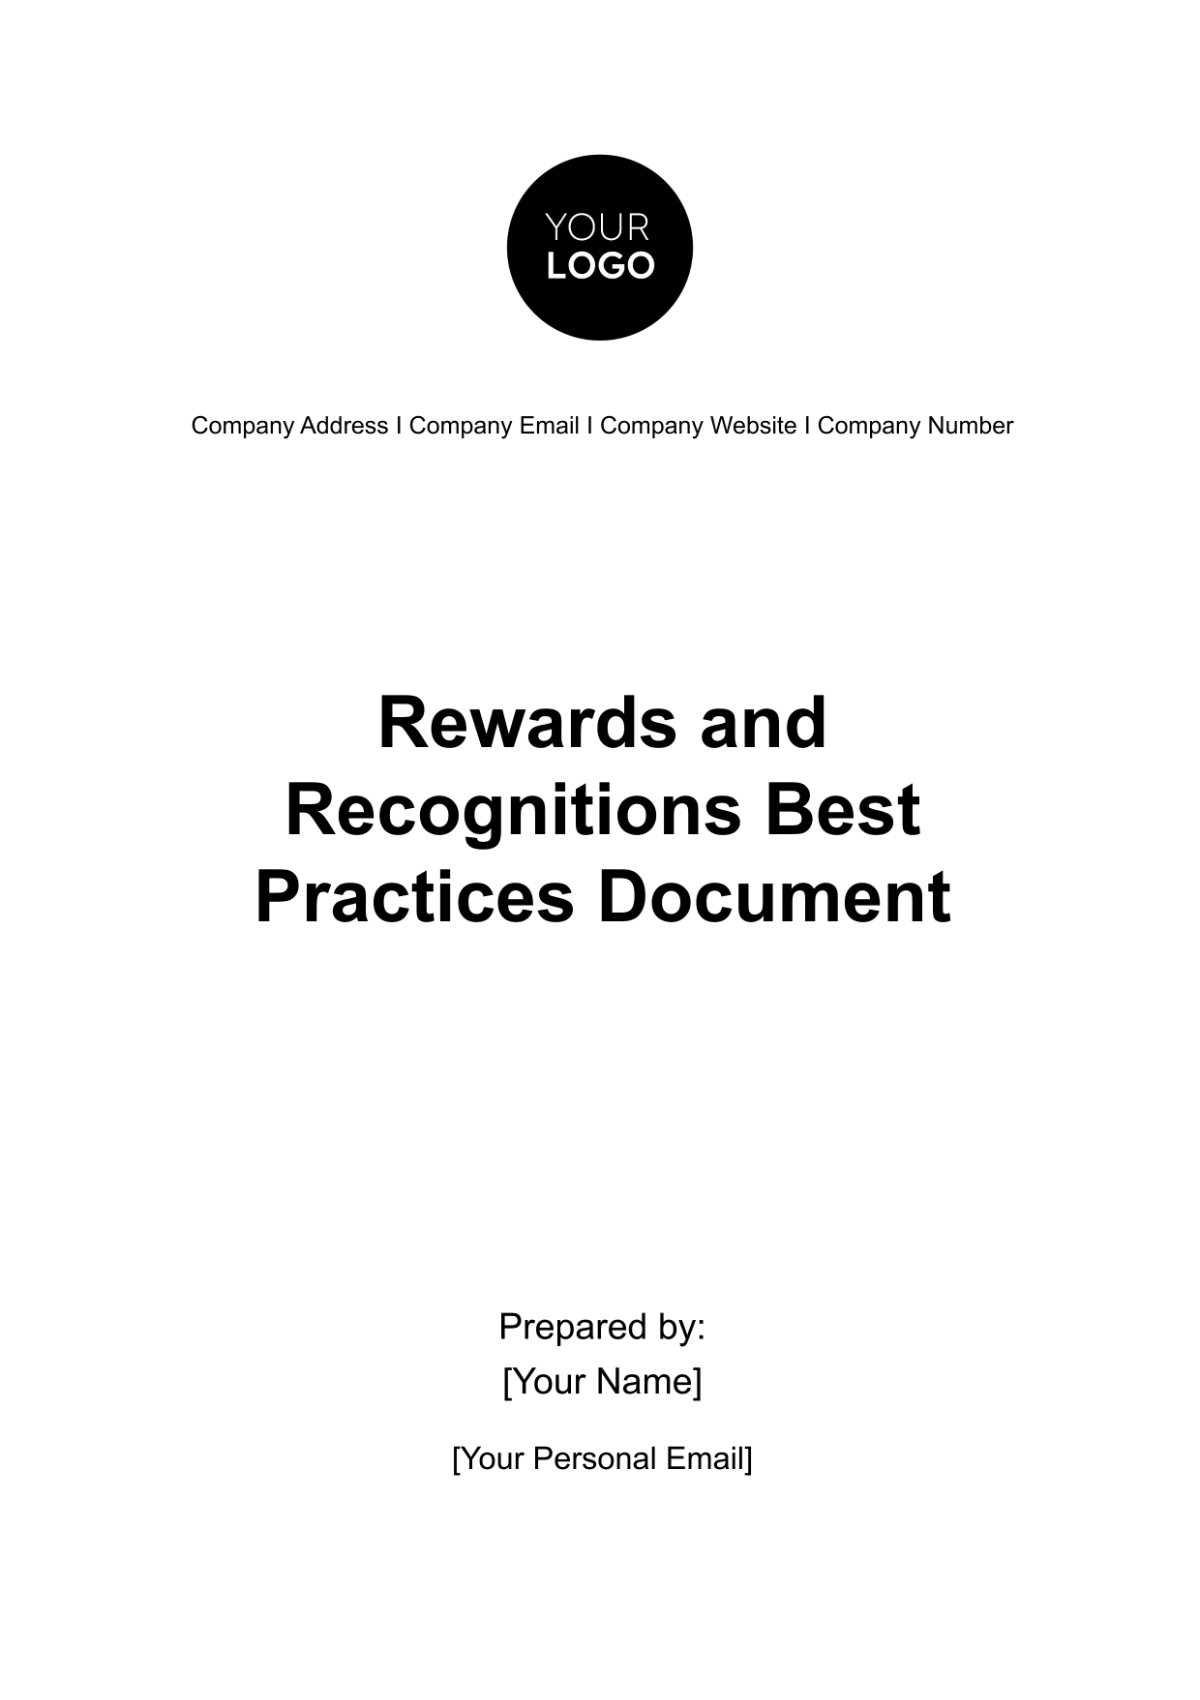 Free Rewards and Recognition Best Practices Document HR Template